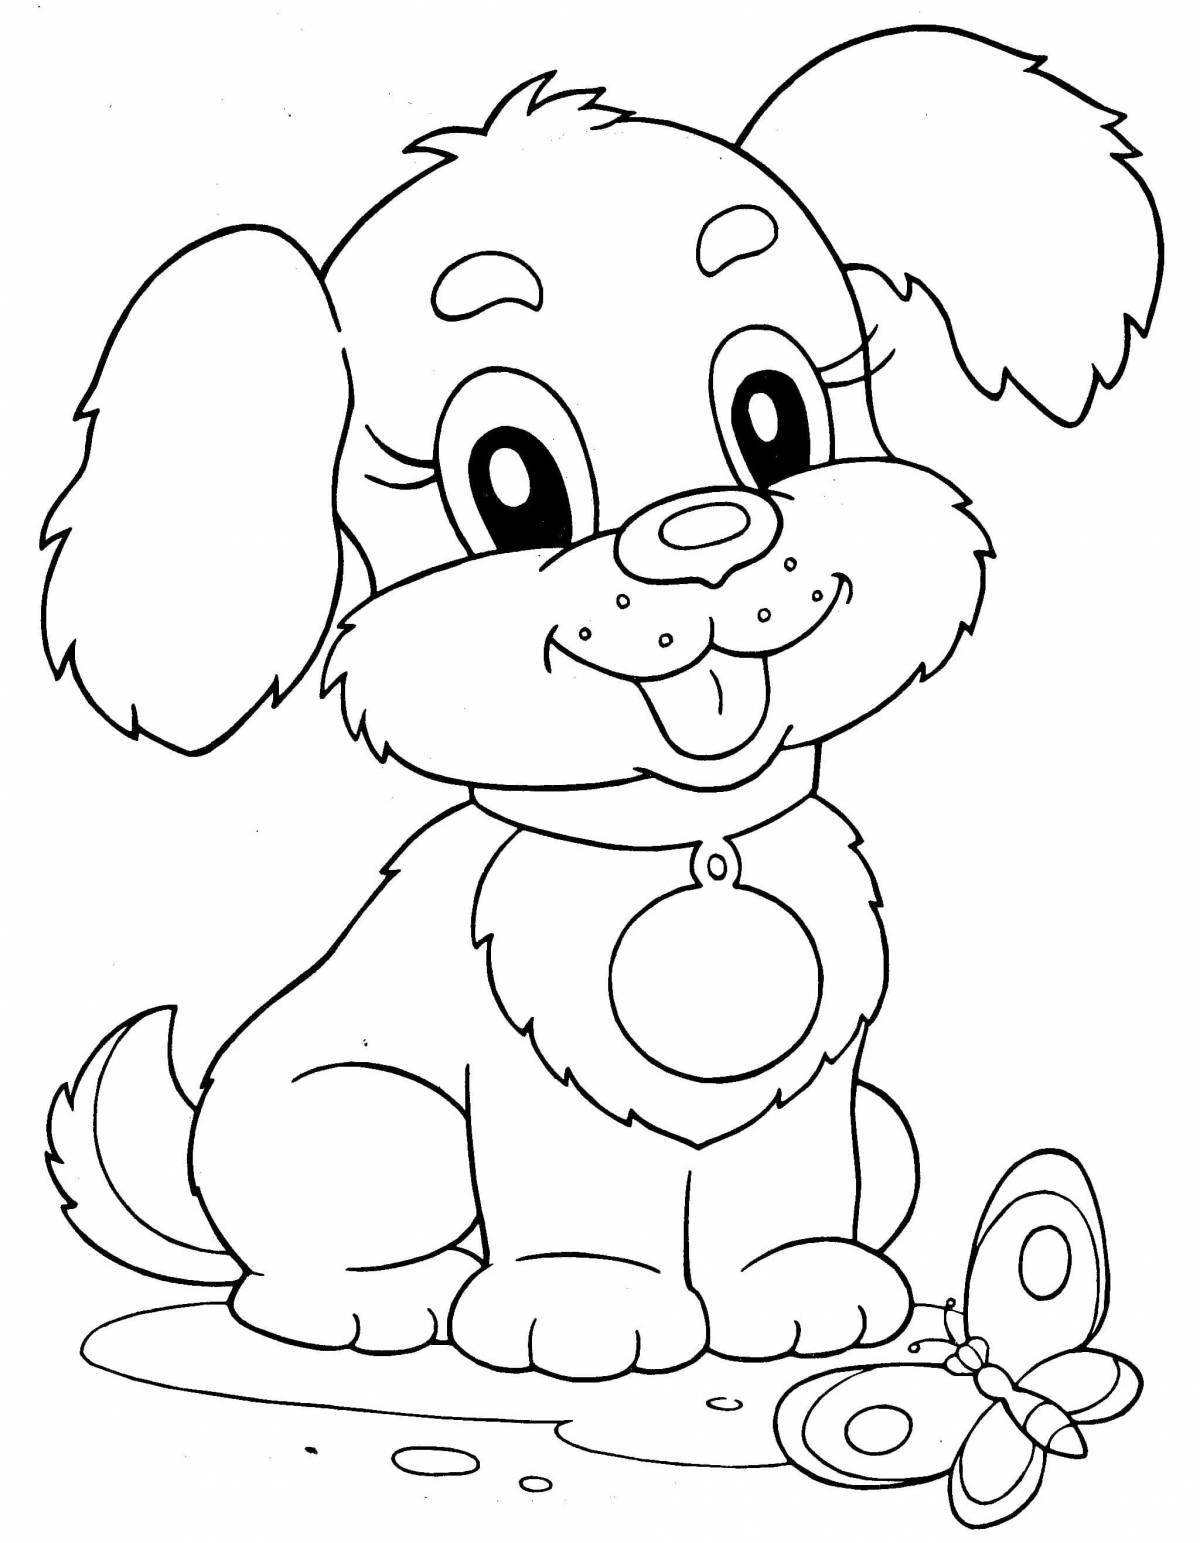 Live Coloring for Toddlers